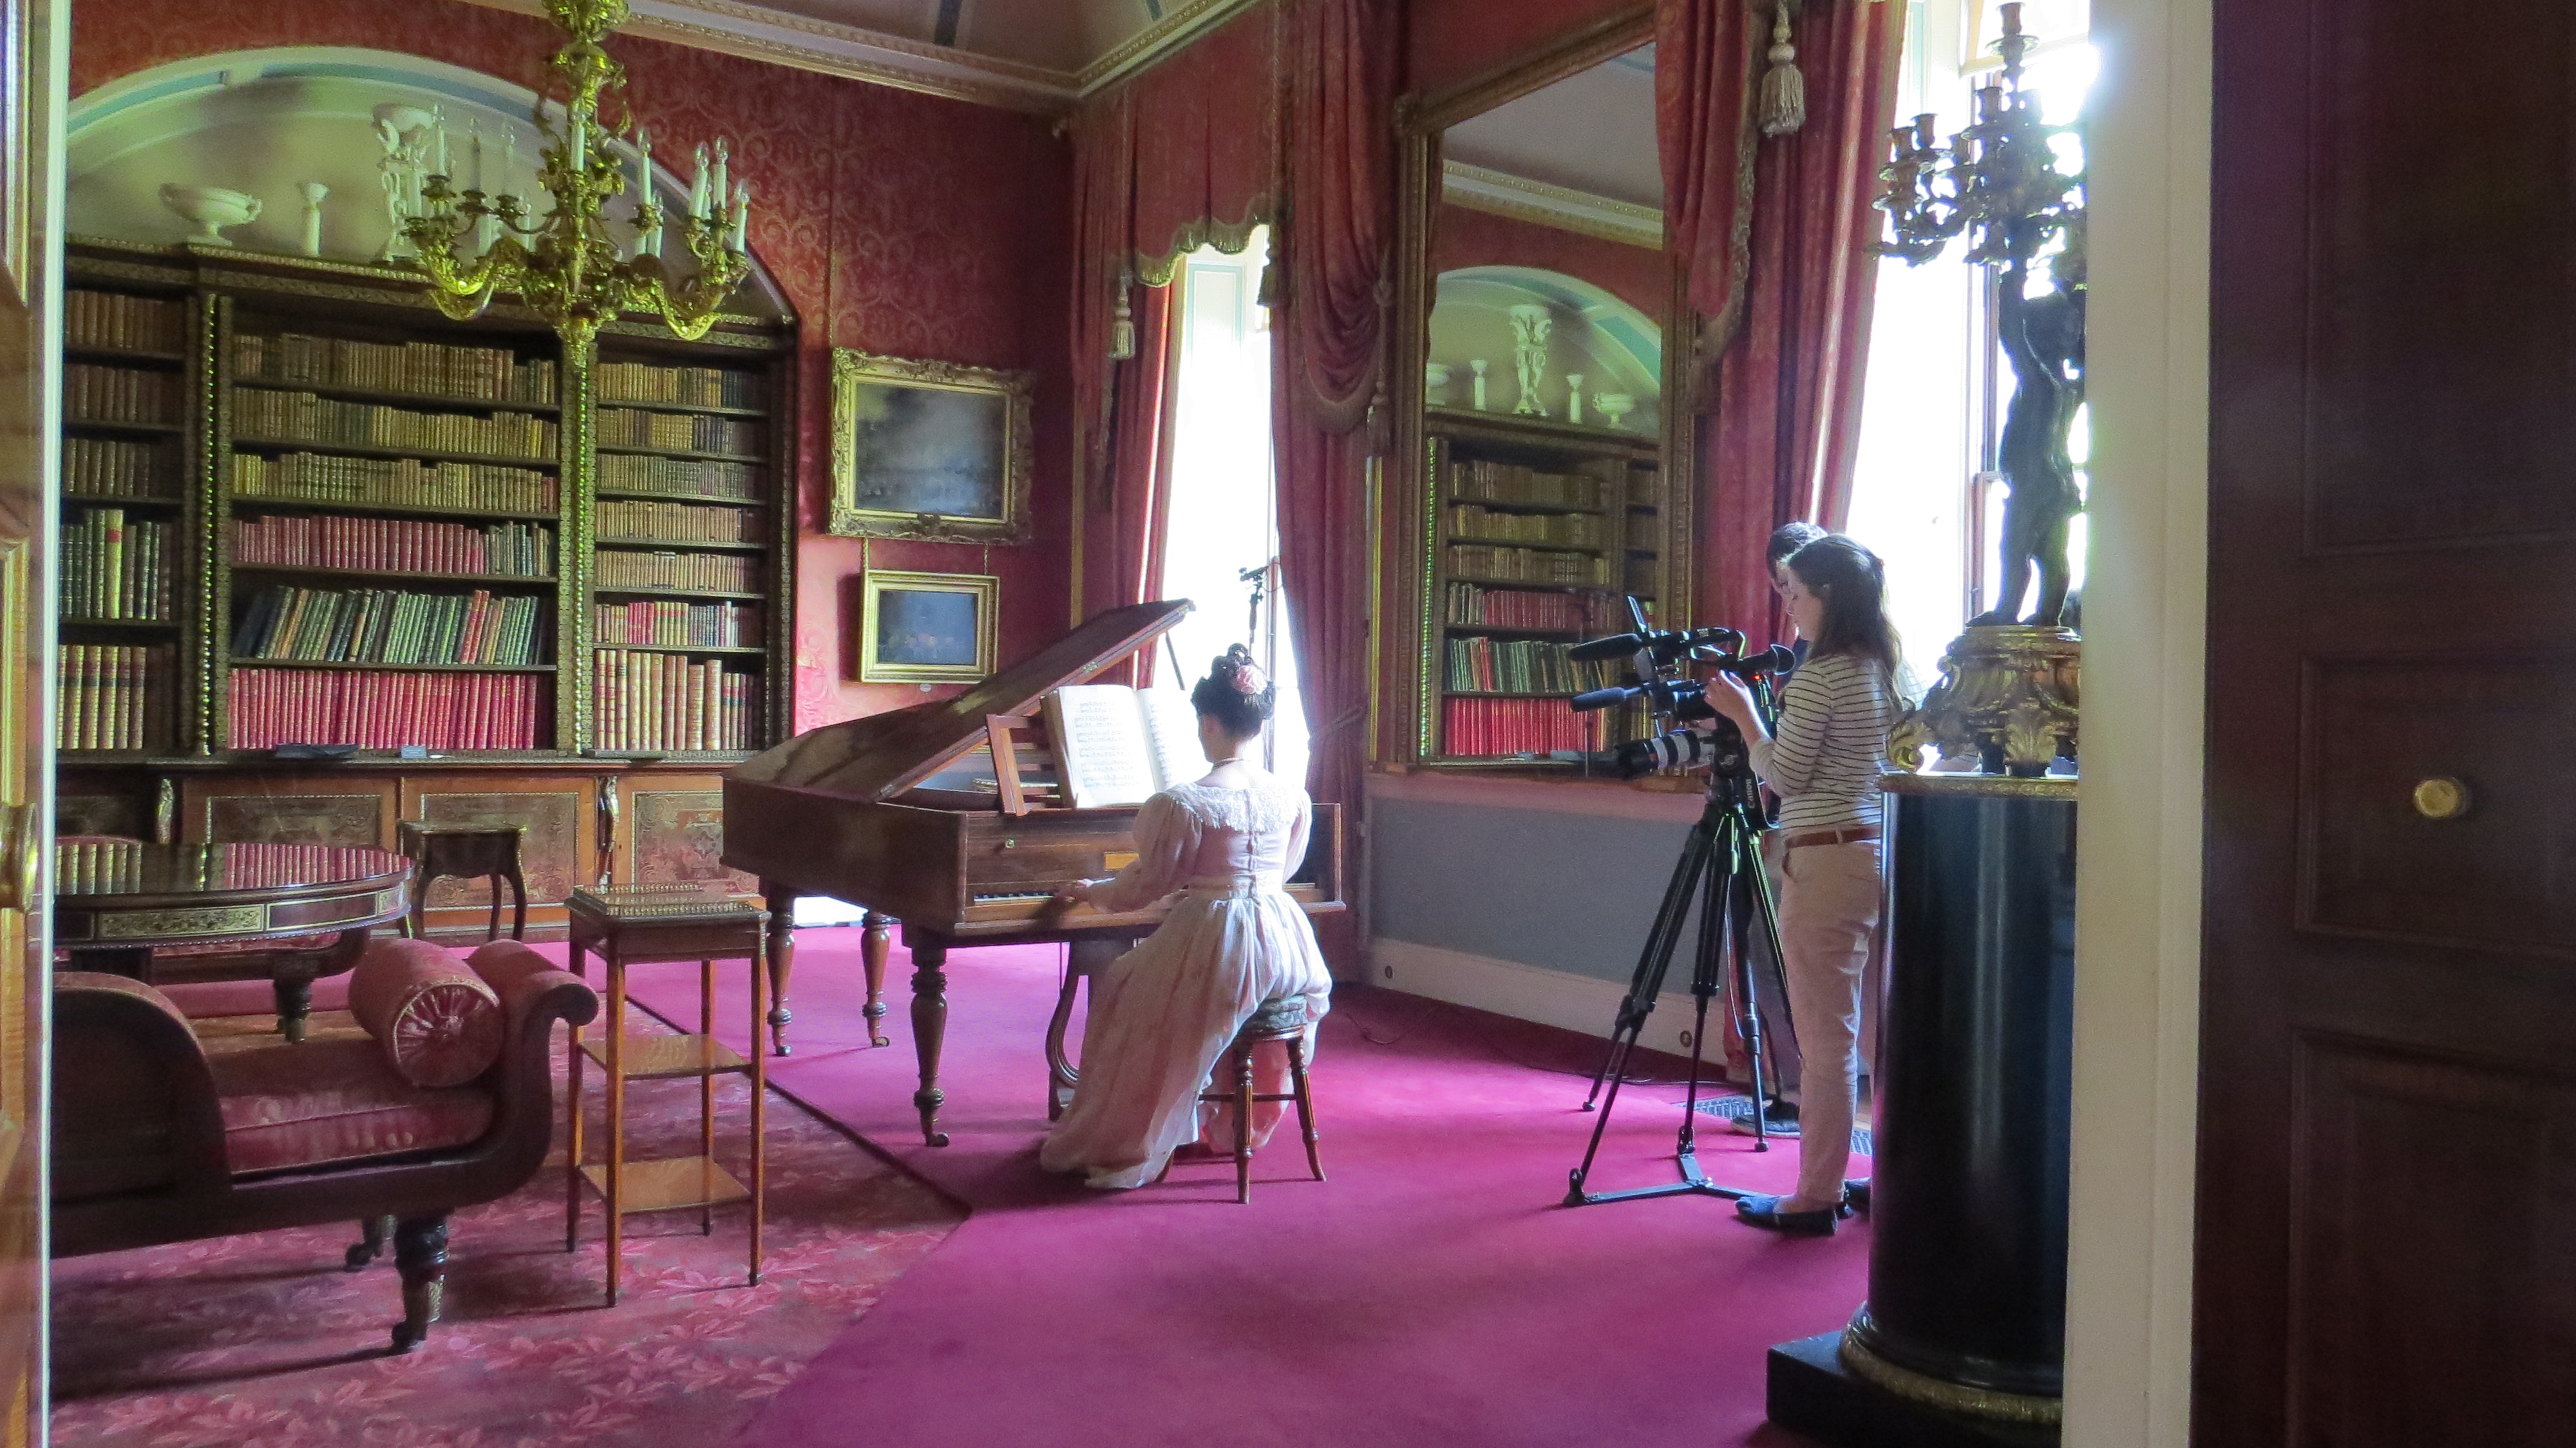 Filming in the Music Room